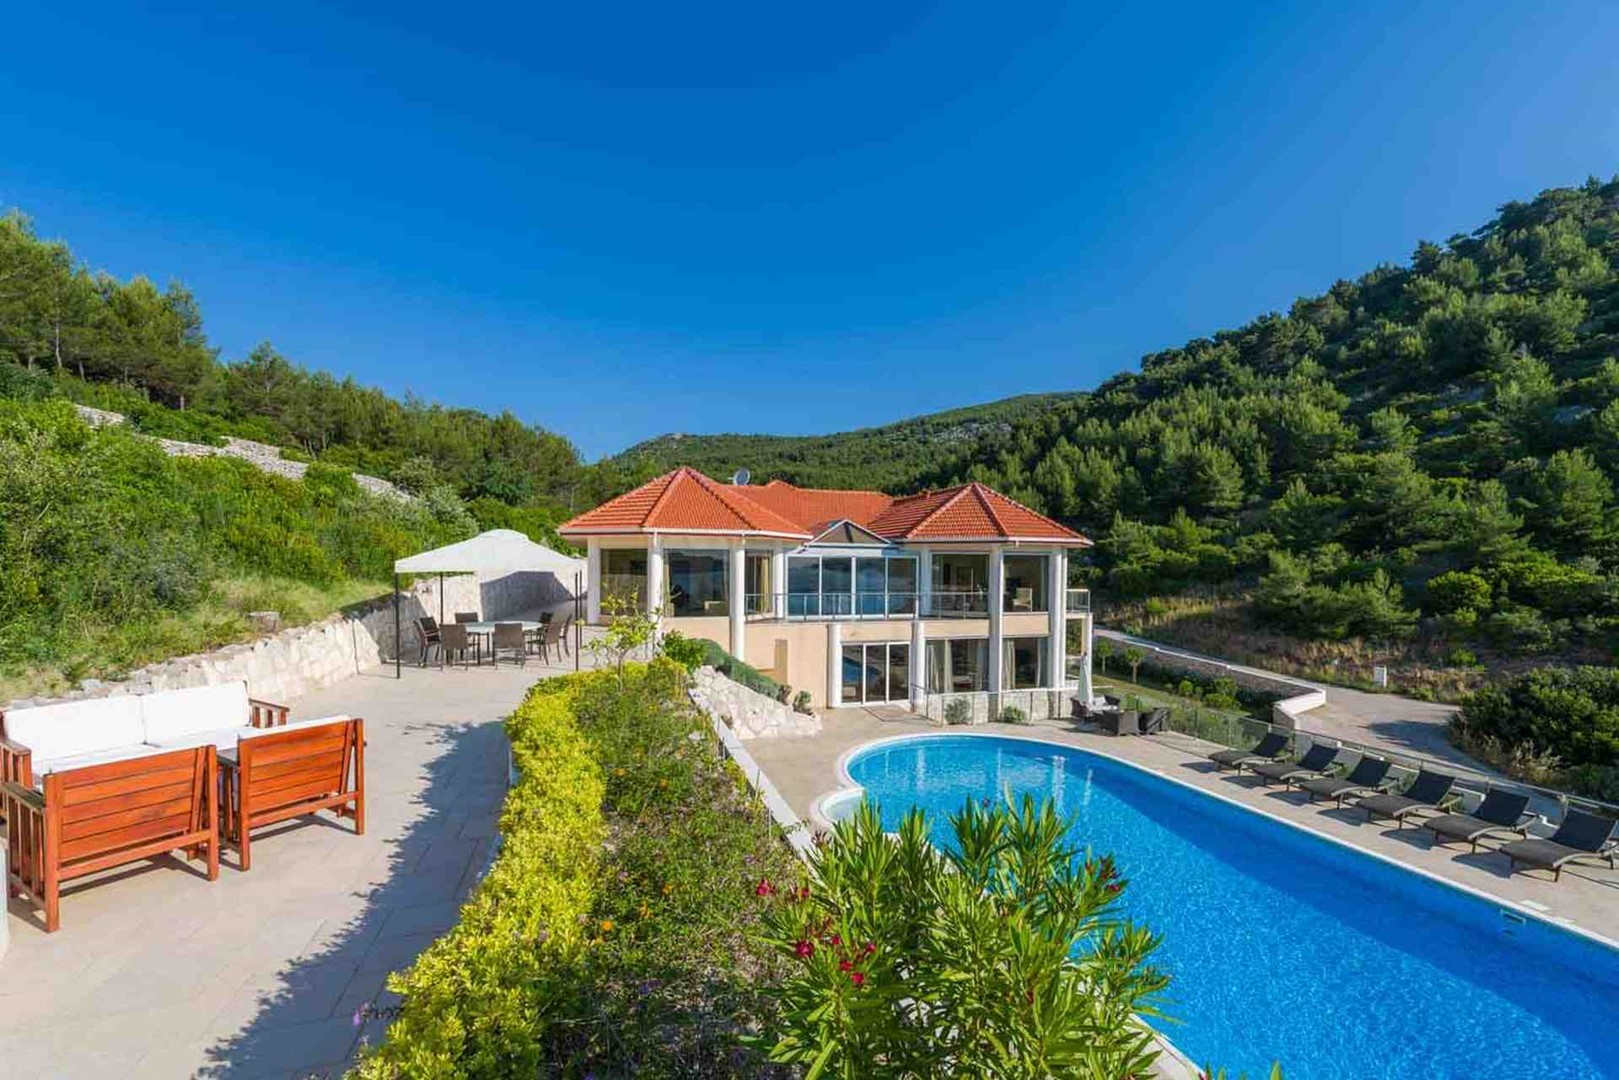 KORCULA LUXURY VILLA with Private Pool, Private Parking, and WIFI